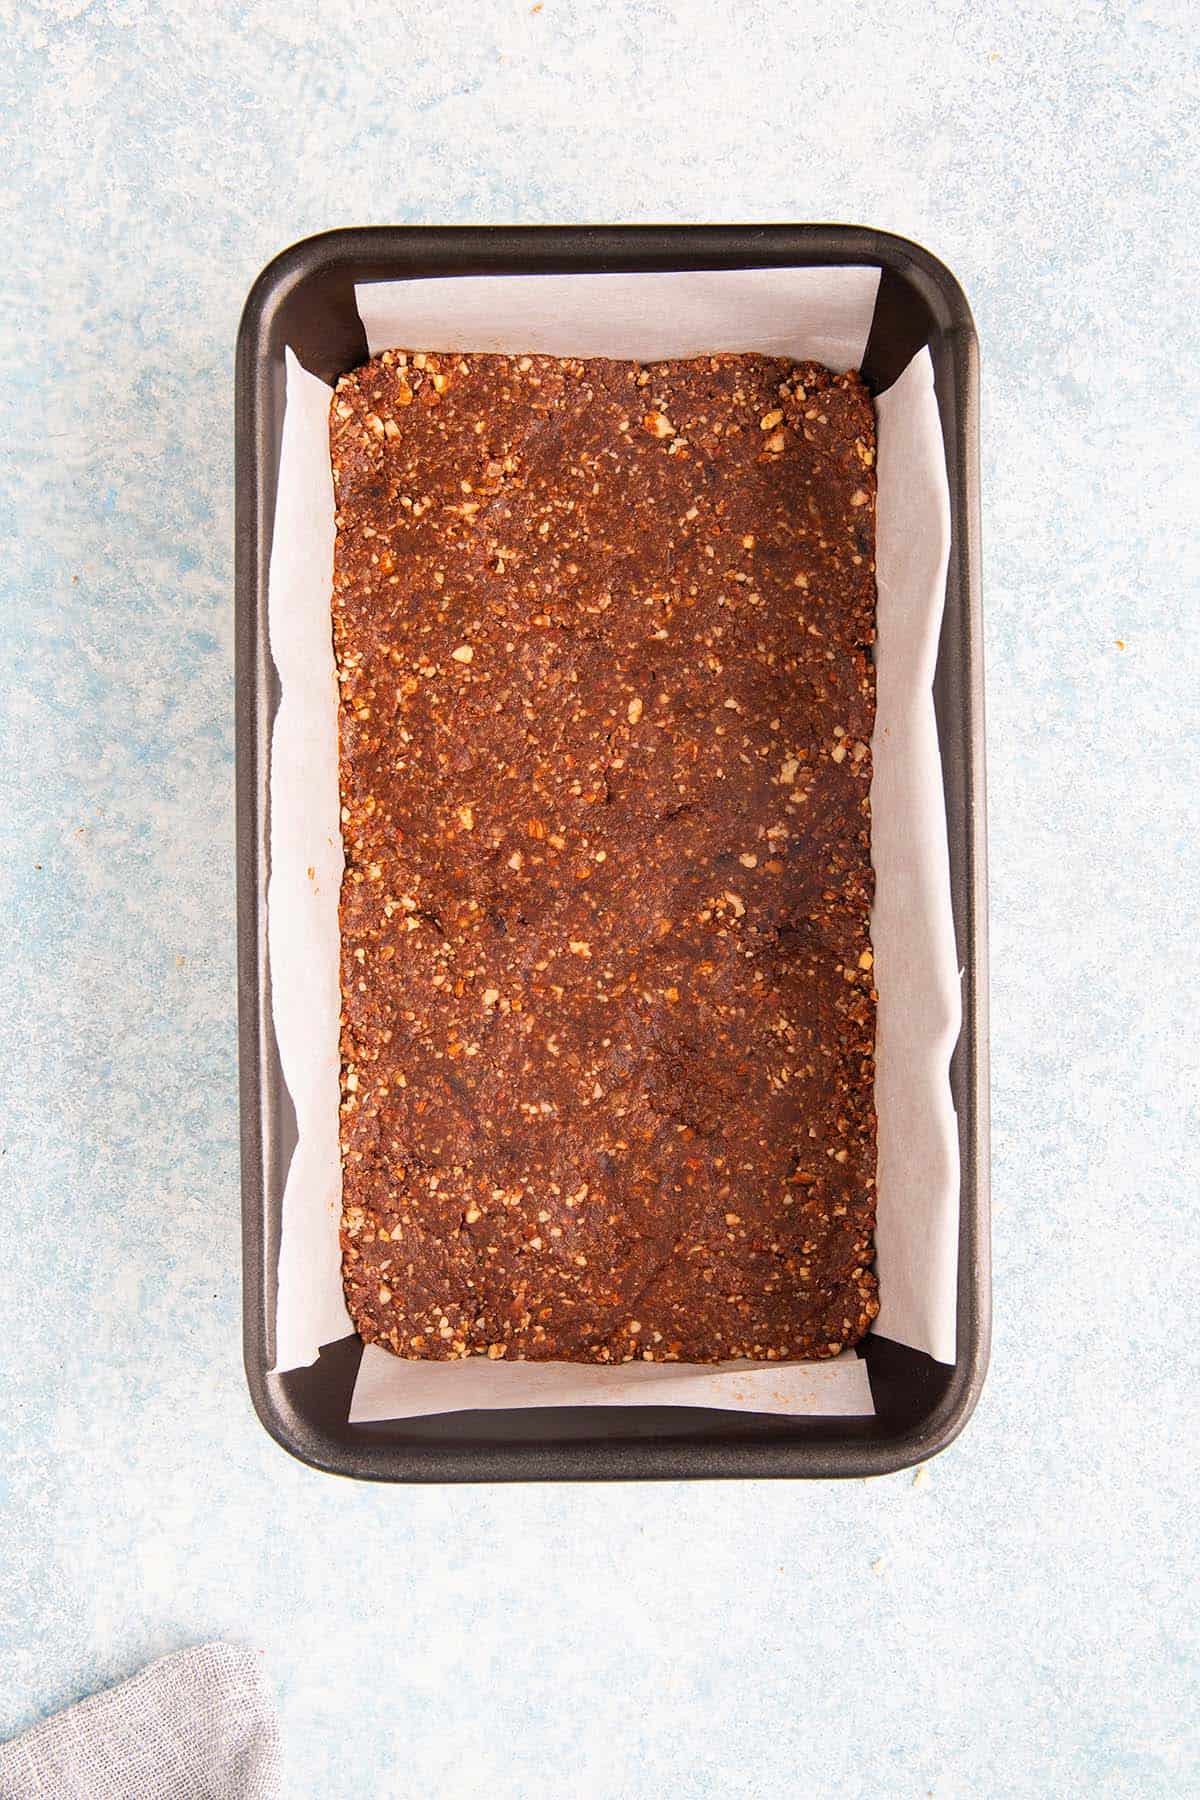 date and nut mixture in a loaf pan before cutting.